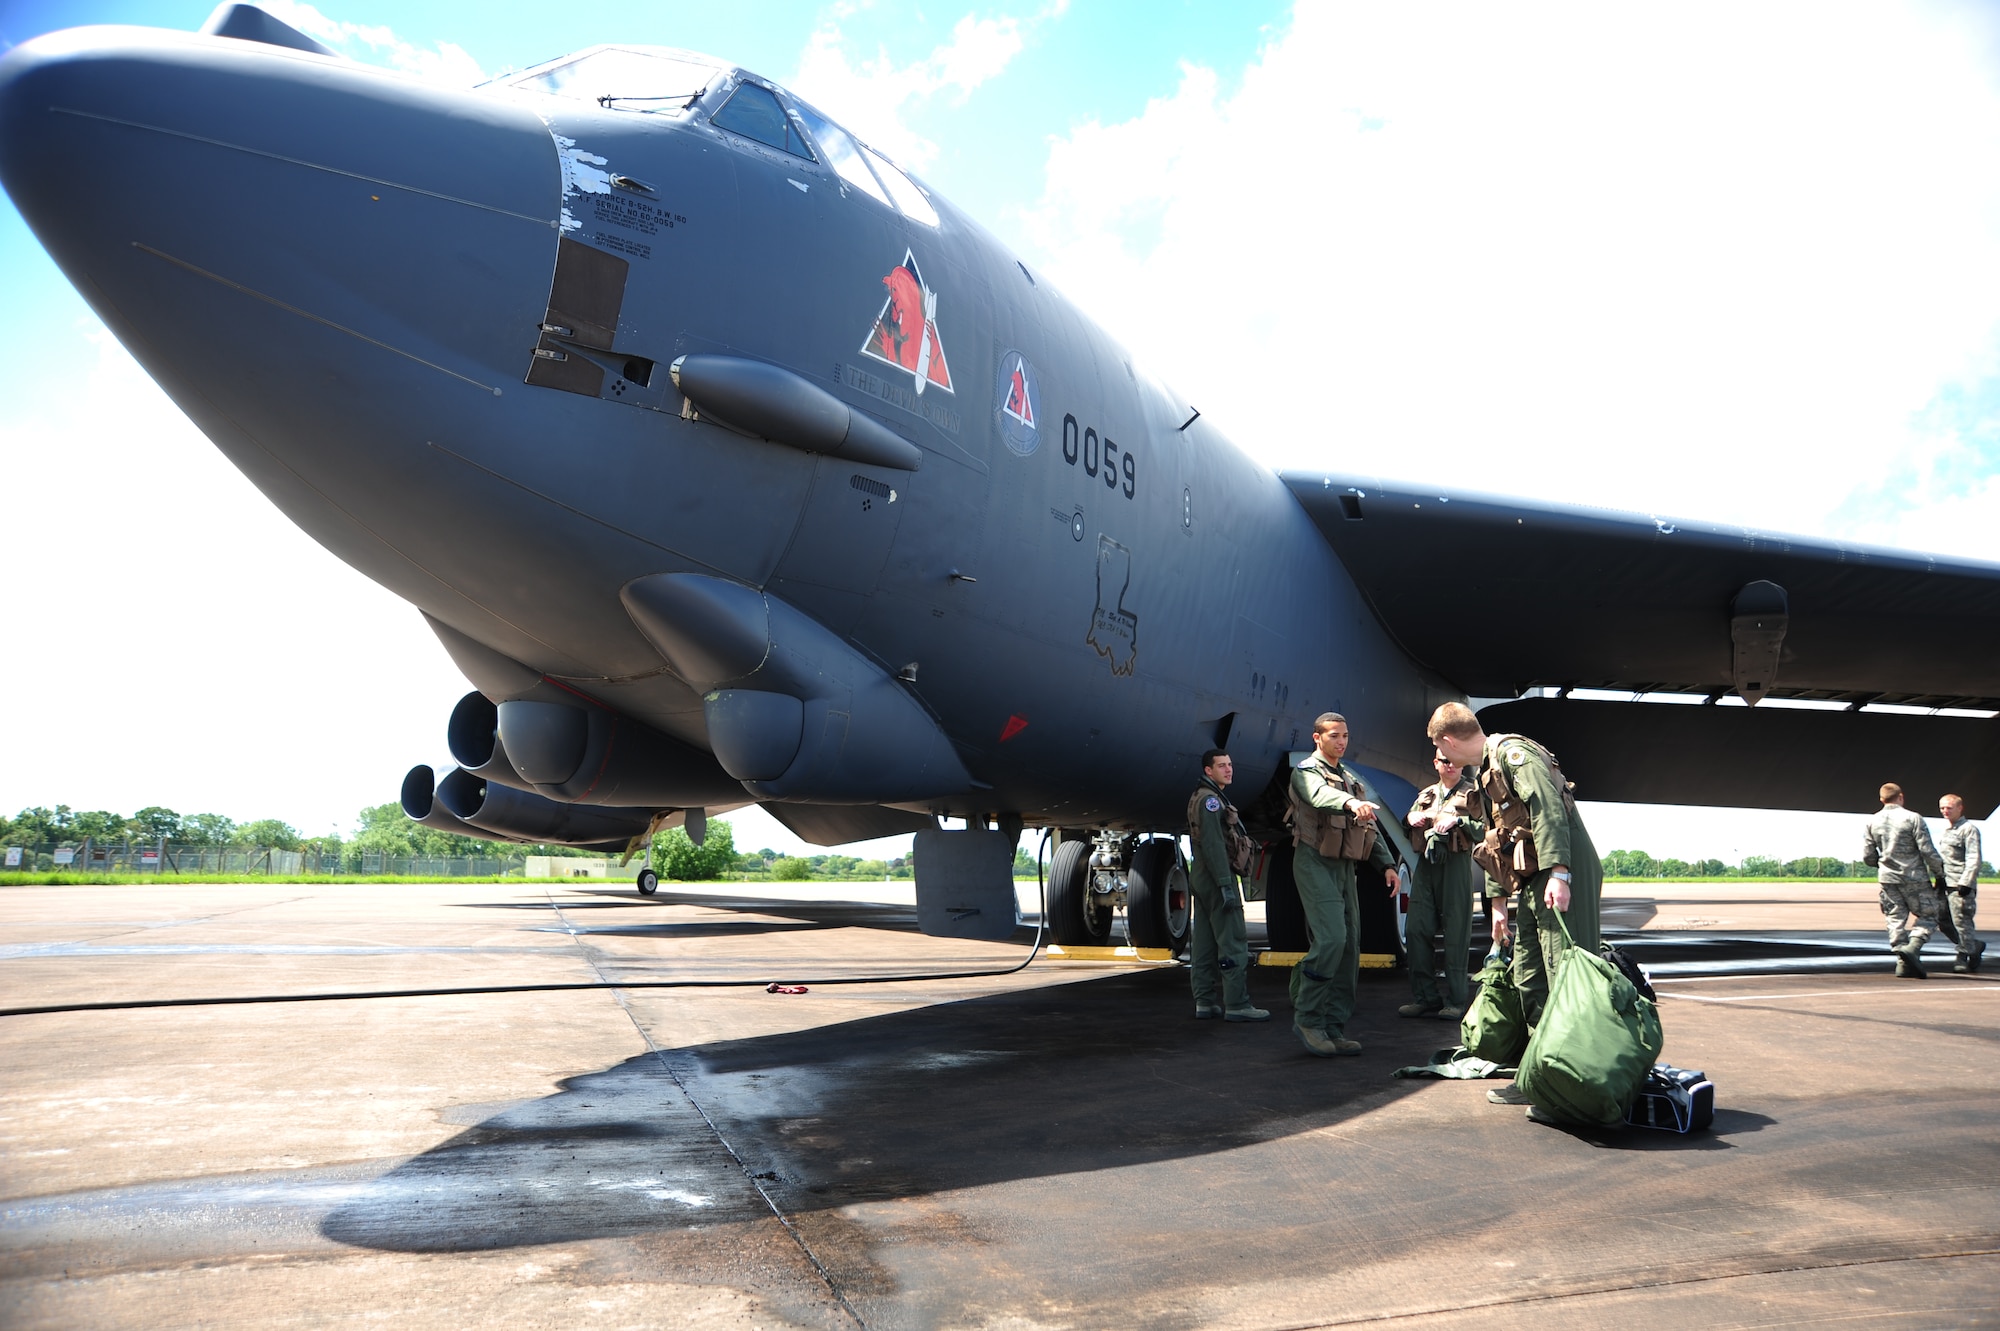 B-52 Stratofortress crewmembers from the 96th Bomb Squadron, Barksdale Air Force Base, La., perform pre-flight checks before taking off at Royal Air Force Base Fairford, United Kingdom, June 7, 2014. The B-52 Stratofortress is a long-range, heavy bomber that can perform a variety of missions. The bomber is capable of flying at high subsonic speeds at altitudes up to 50,000 feet. (U.S. Air Force photo by Staff Sgt. Nick Wilson/Released)